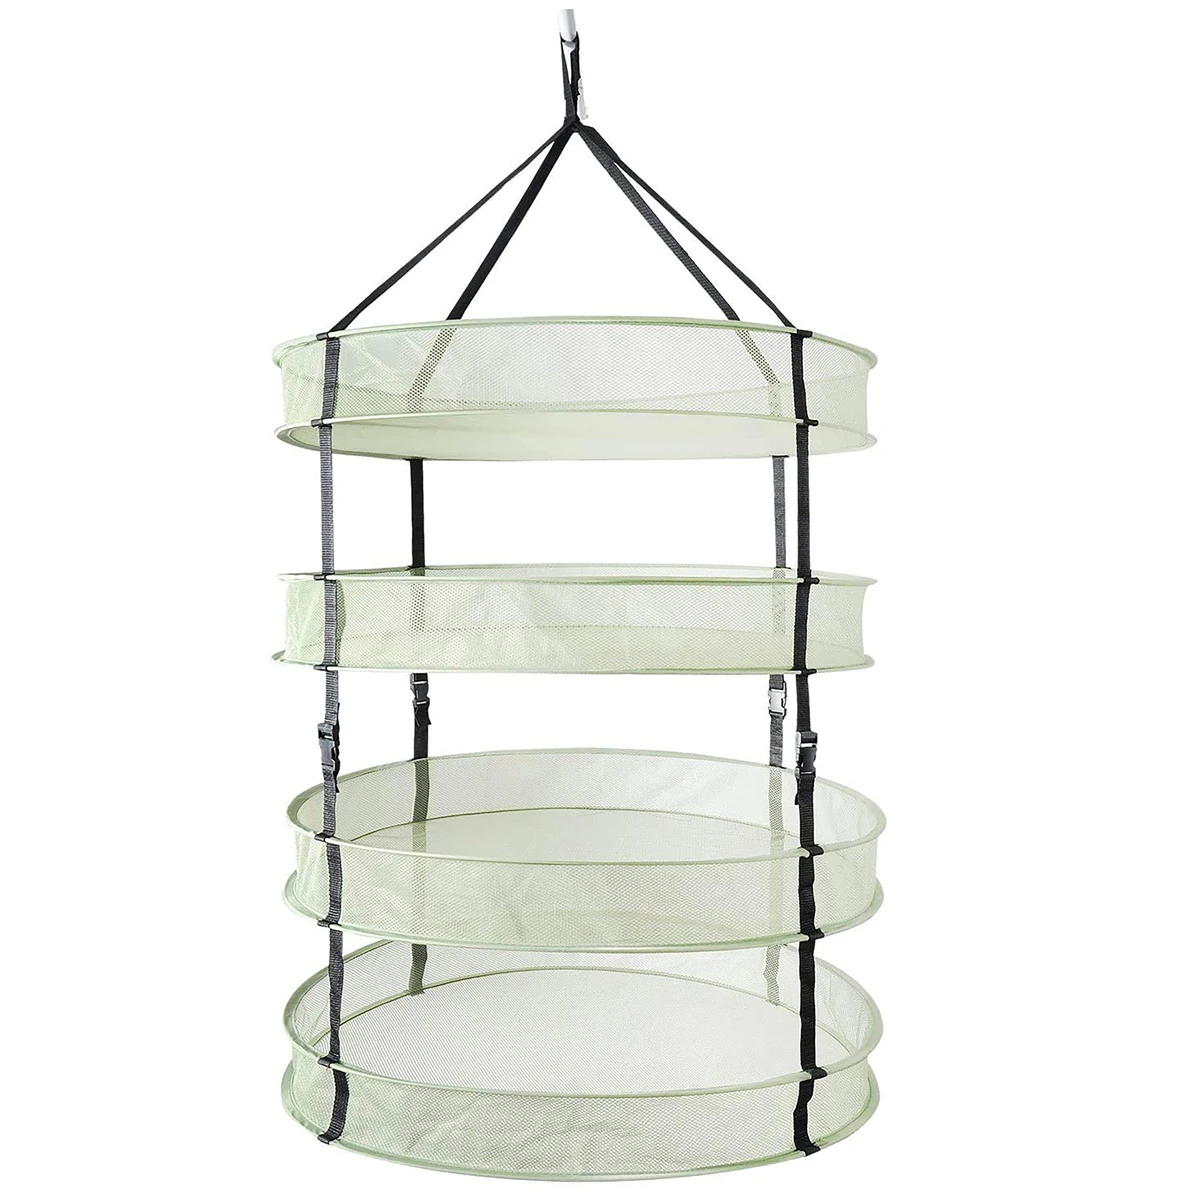 Herb Drying Rack 8-Layer 2 ft. Foldable Hanging Mesh Net Dryer with Zippers, Storage Bag and Hook, Nylon (2-Pack)